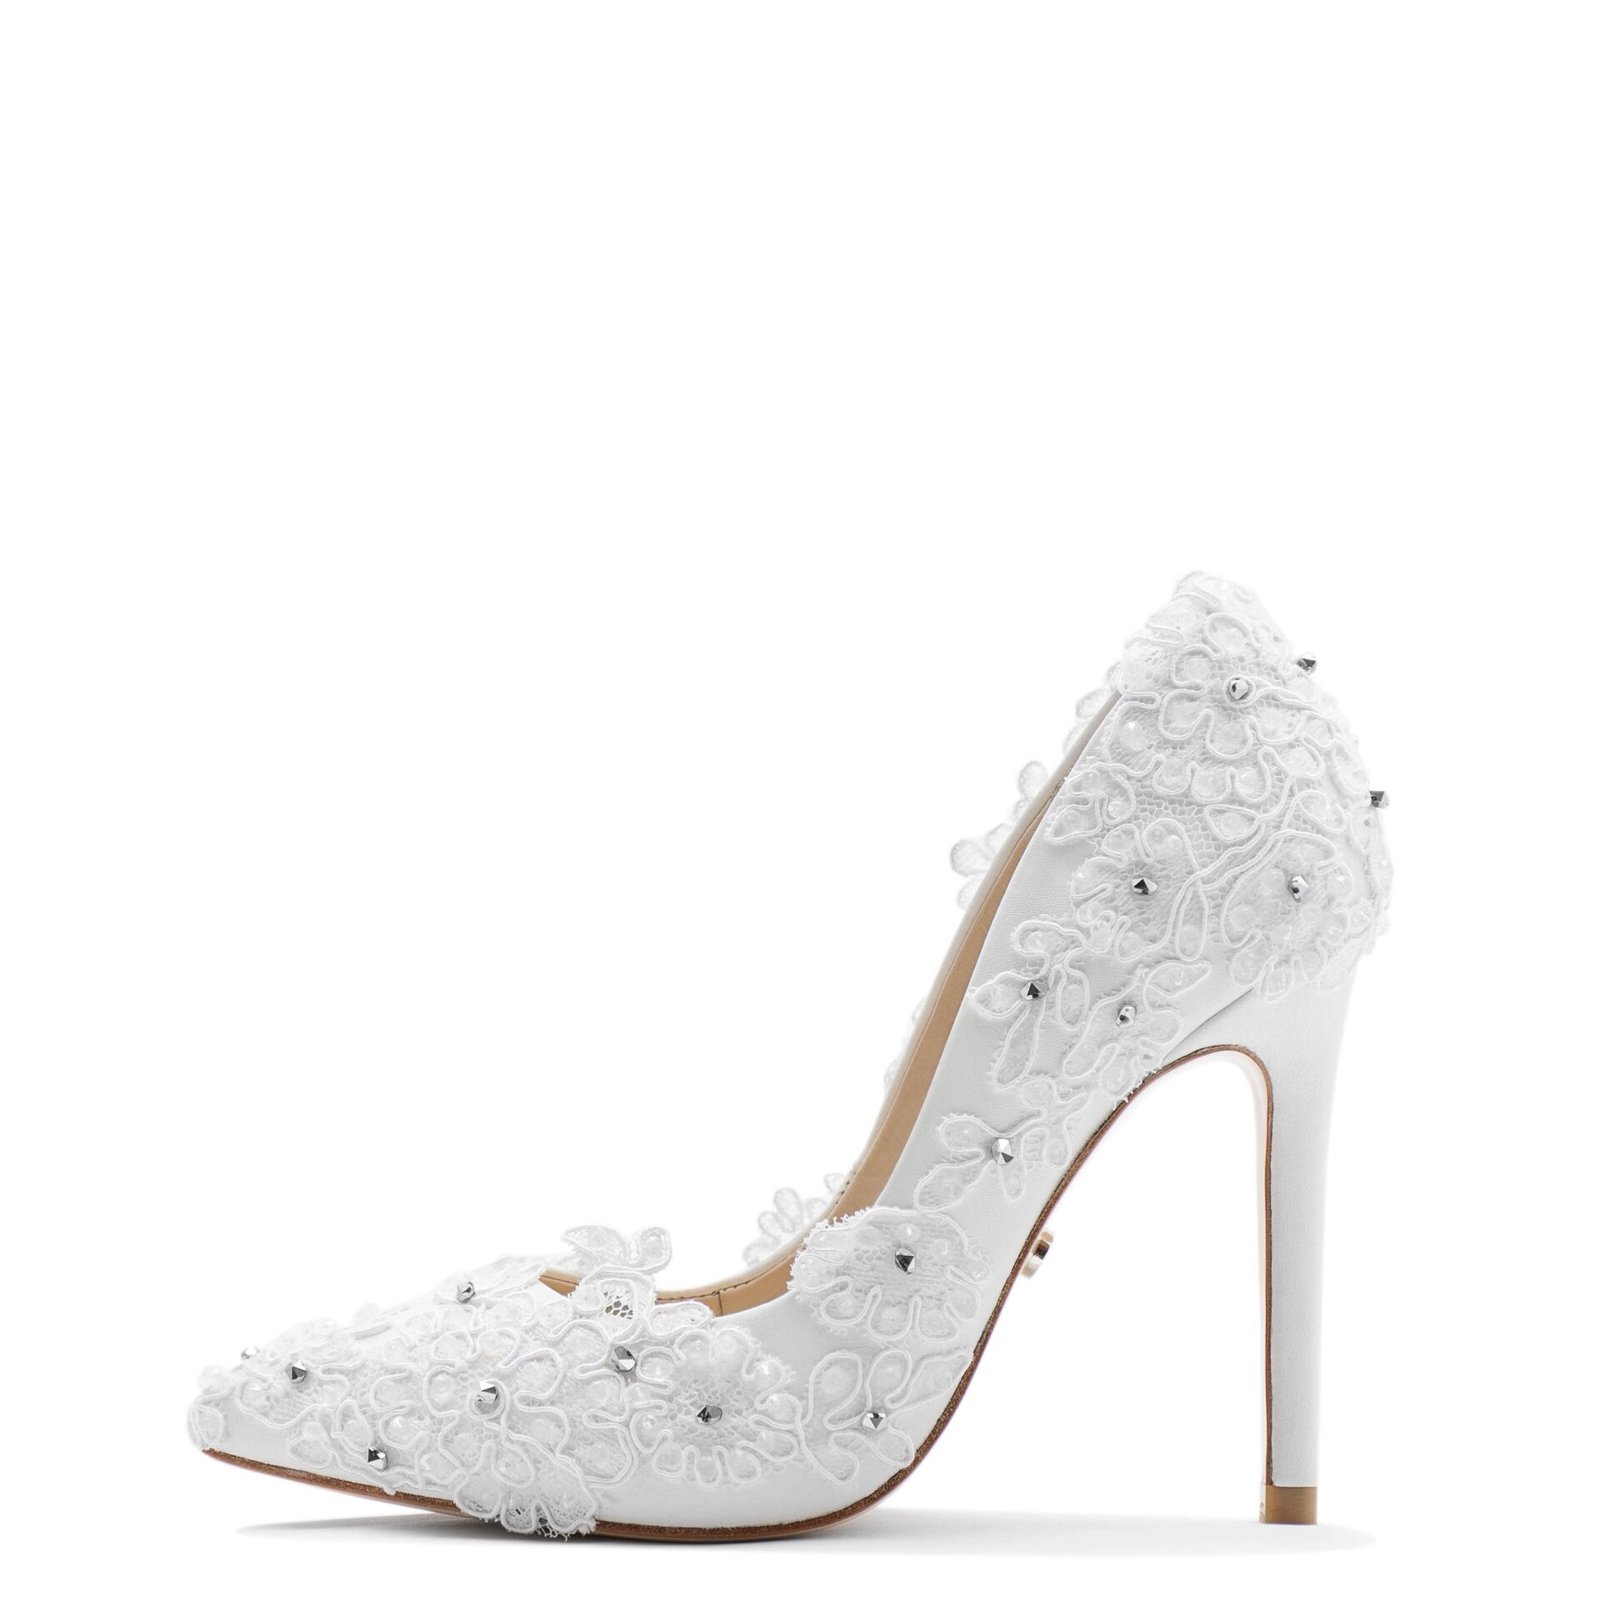 White wedding pump with lace & crystals